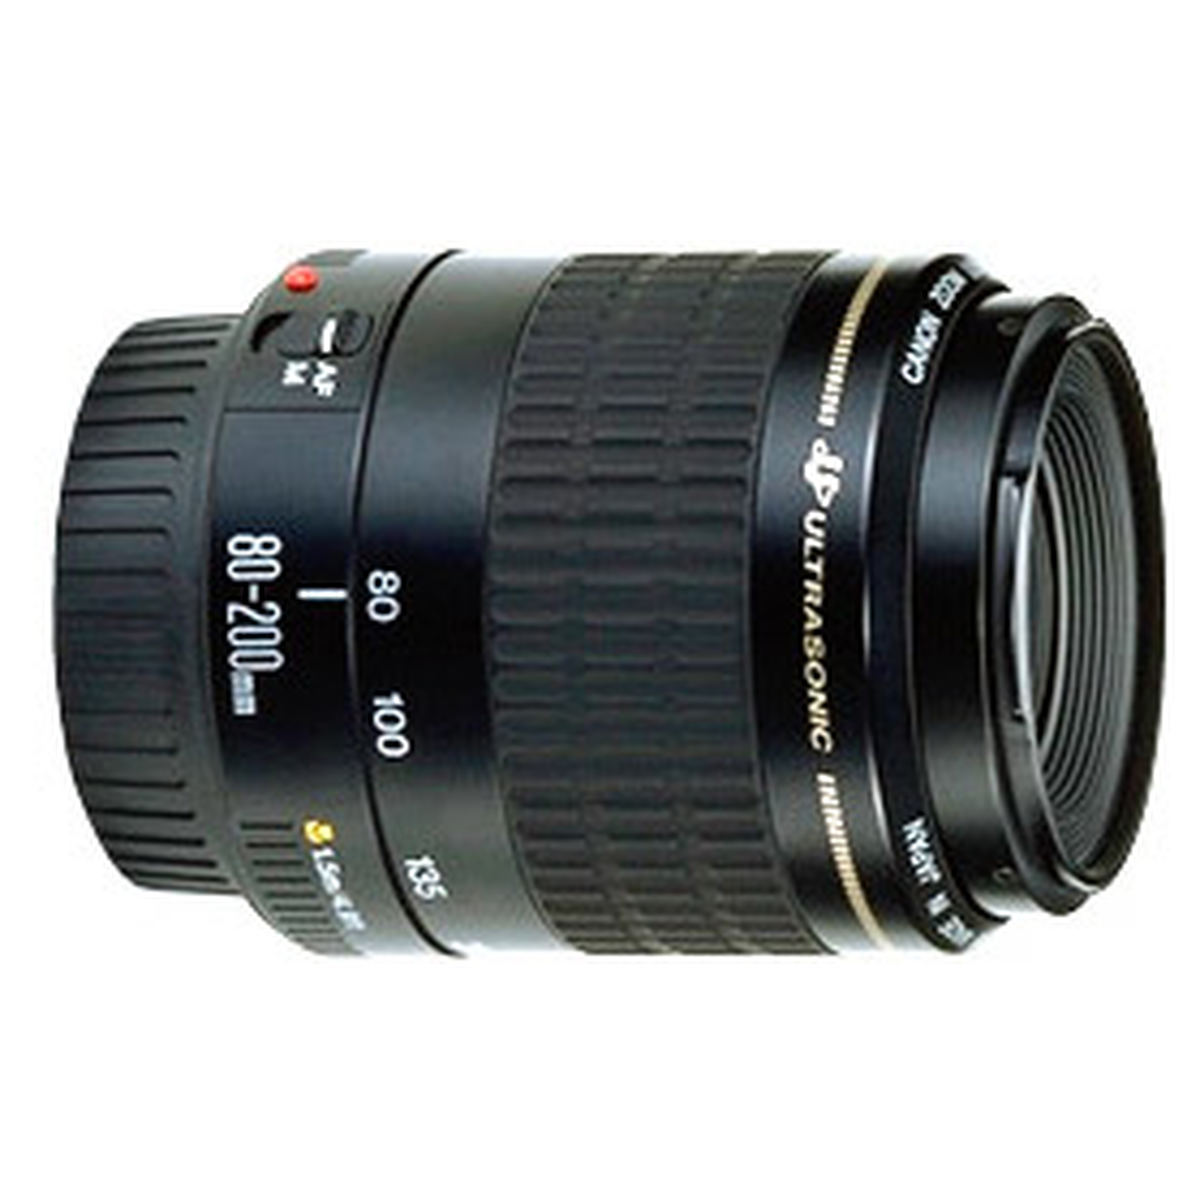 Canon EF 80-200mm f/4.5-5.6 USM : Specifications and Opinions | JuzaPhoto